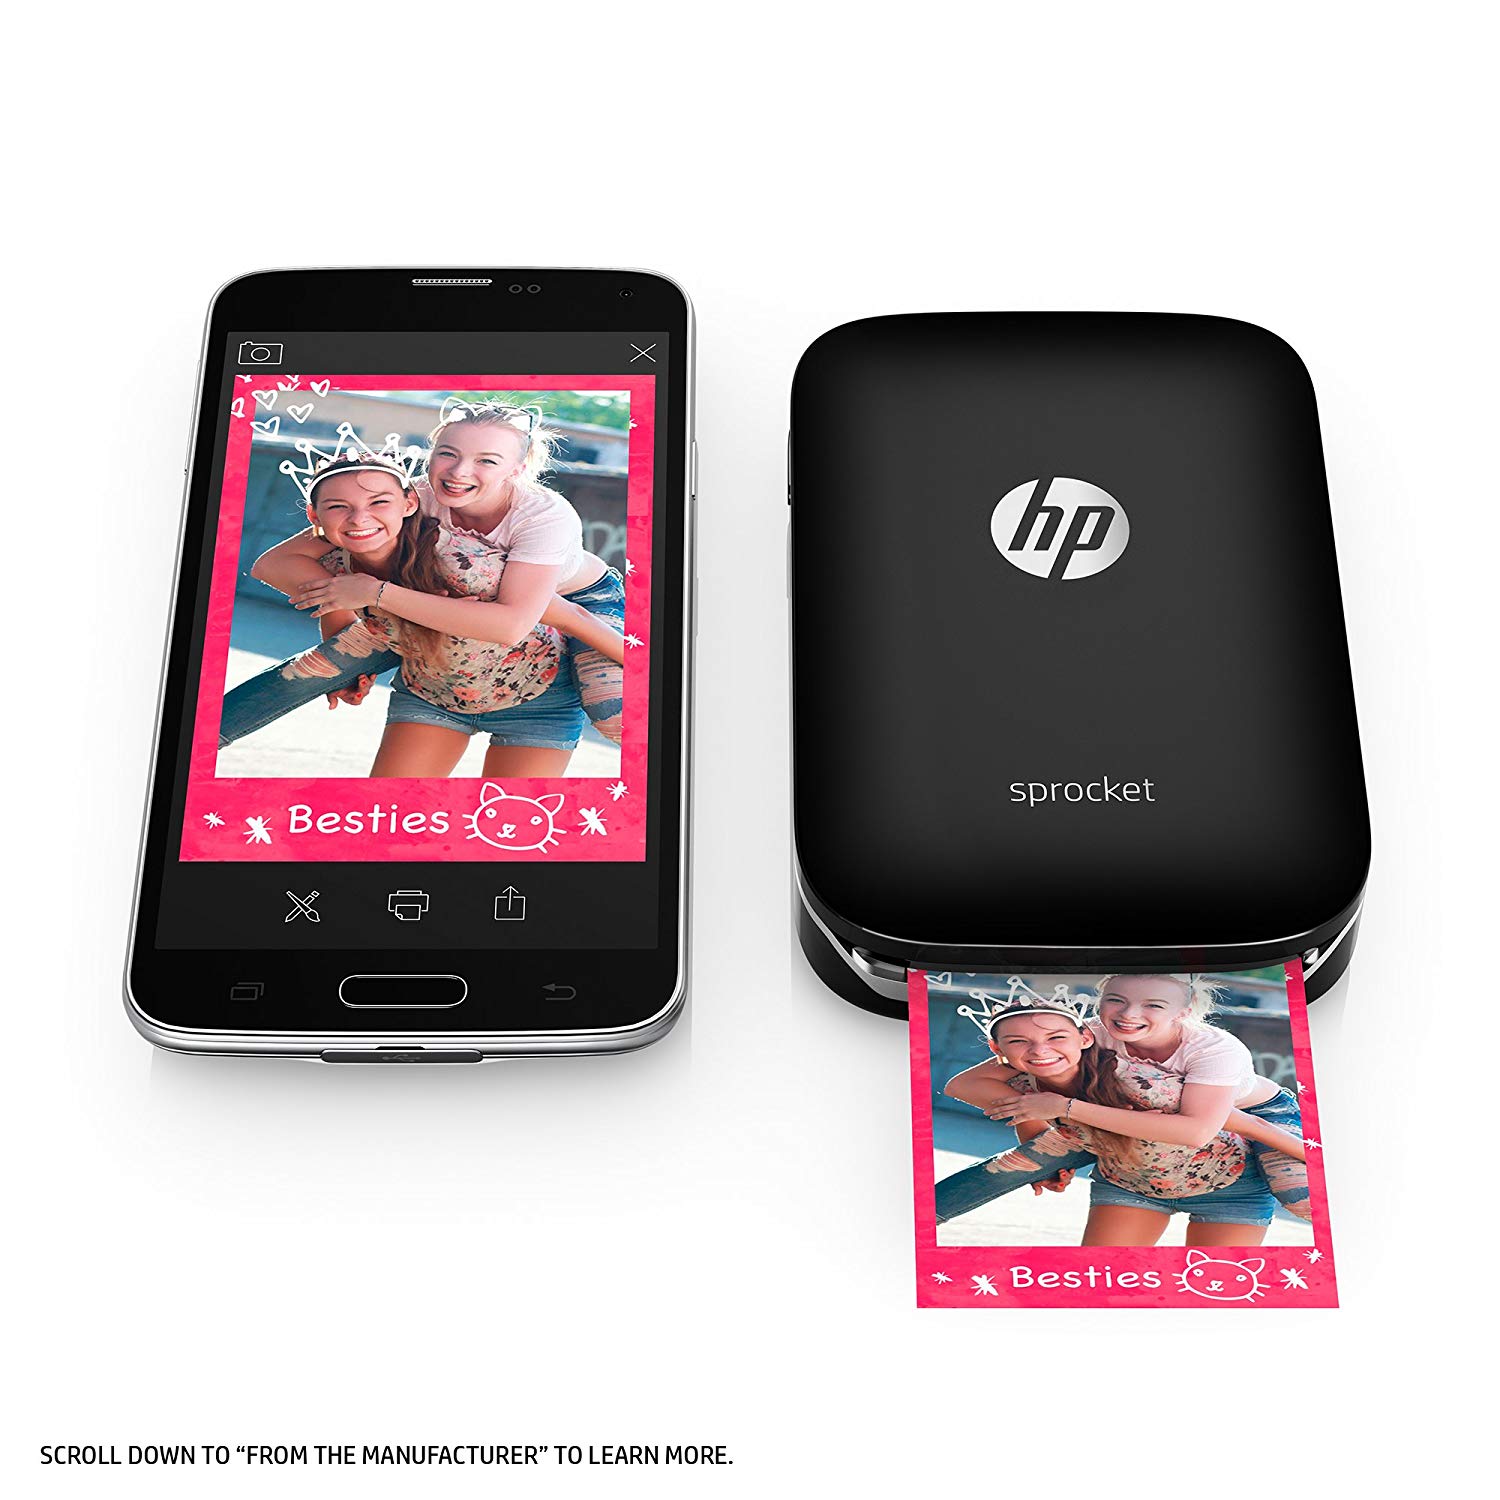 HP Sprocket Portable Photo Printer with additional 20 sheets ZINK Sticky-Backed Photo Paper, $90 @amazon.com